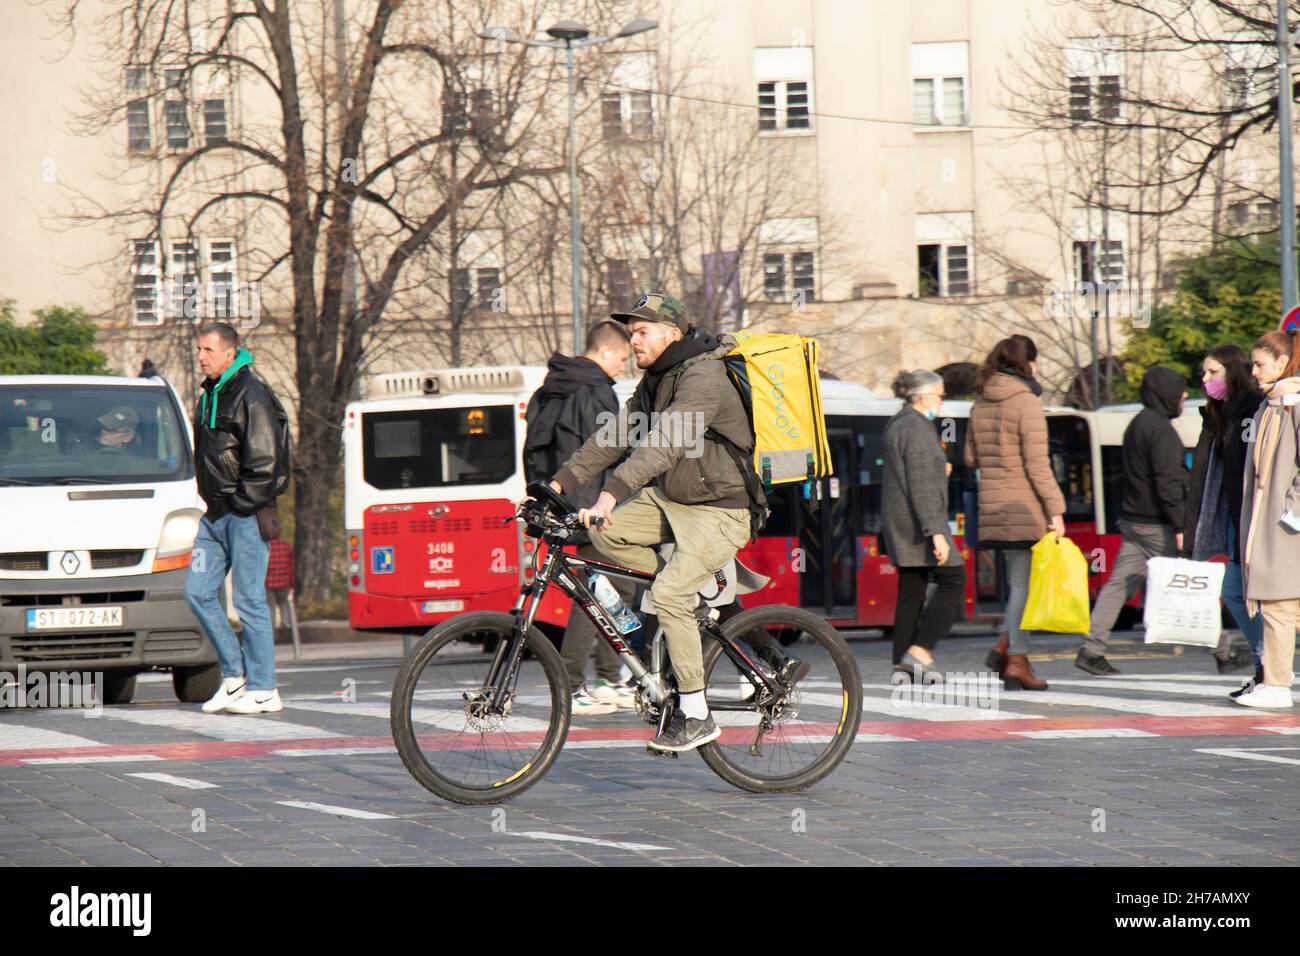 Belgrade, Serbia - November 17, 2021: Person working for Glovo city food delivery service riding a bike while crossing the busy city street Stock Photo